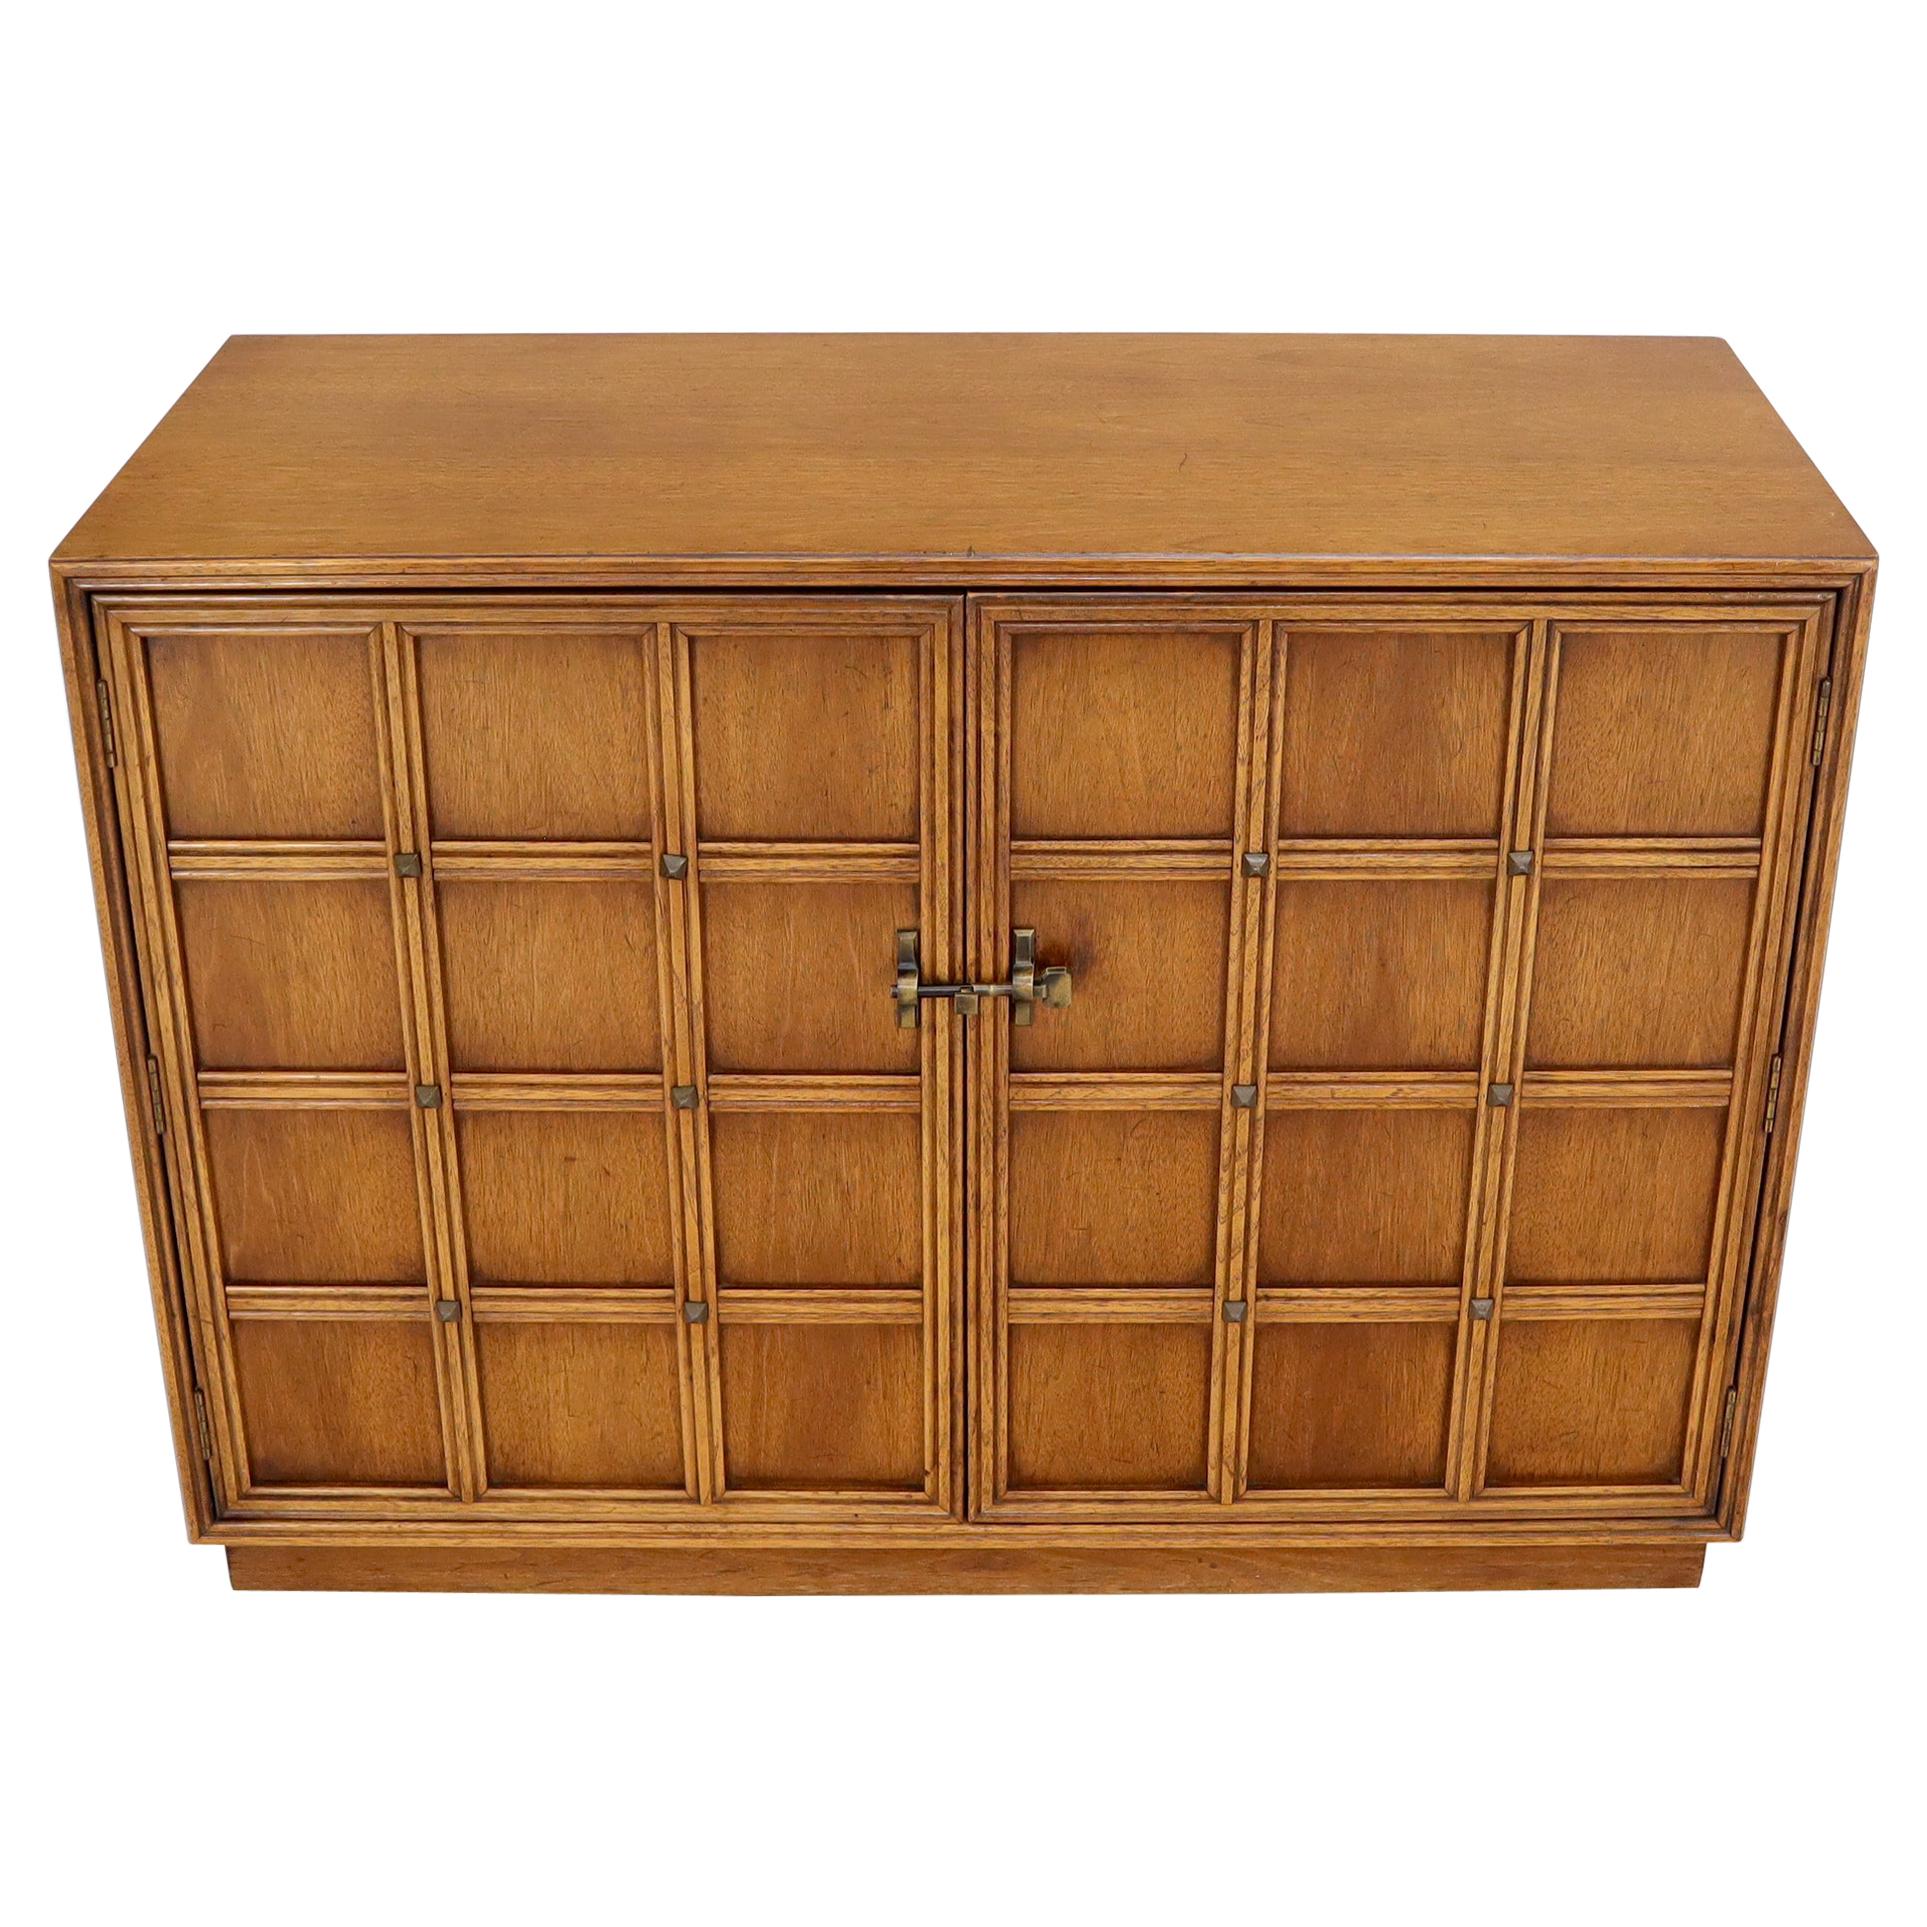 Double Door Buckle Latch Lattice and Brass Studs Front Credenza Console Cabinet